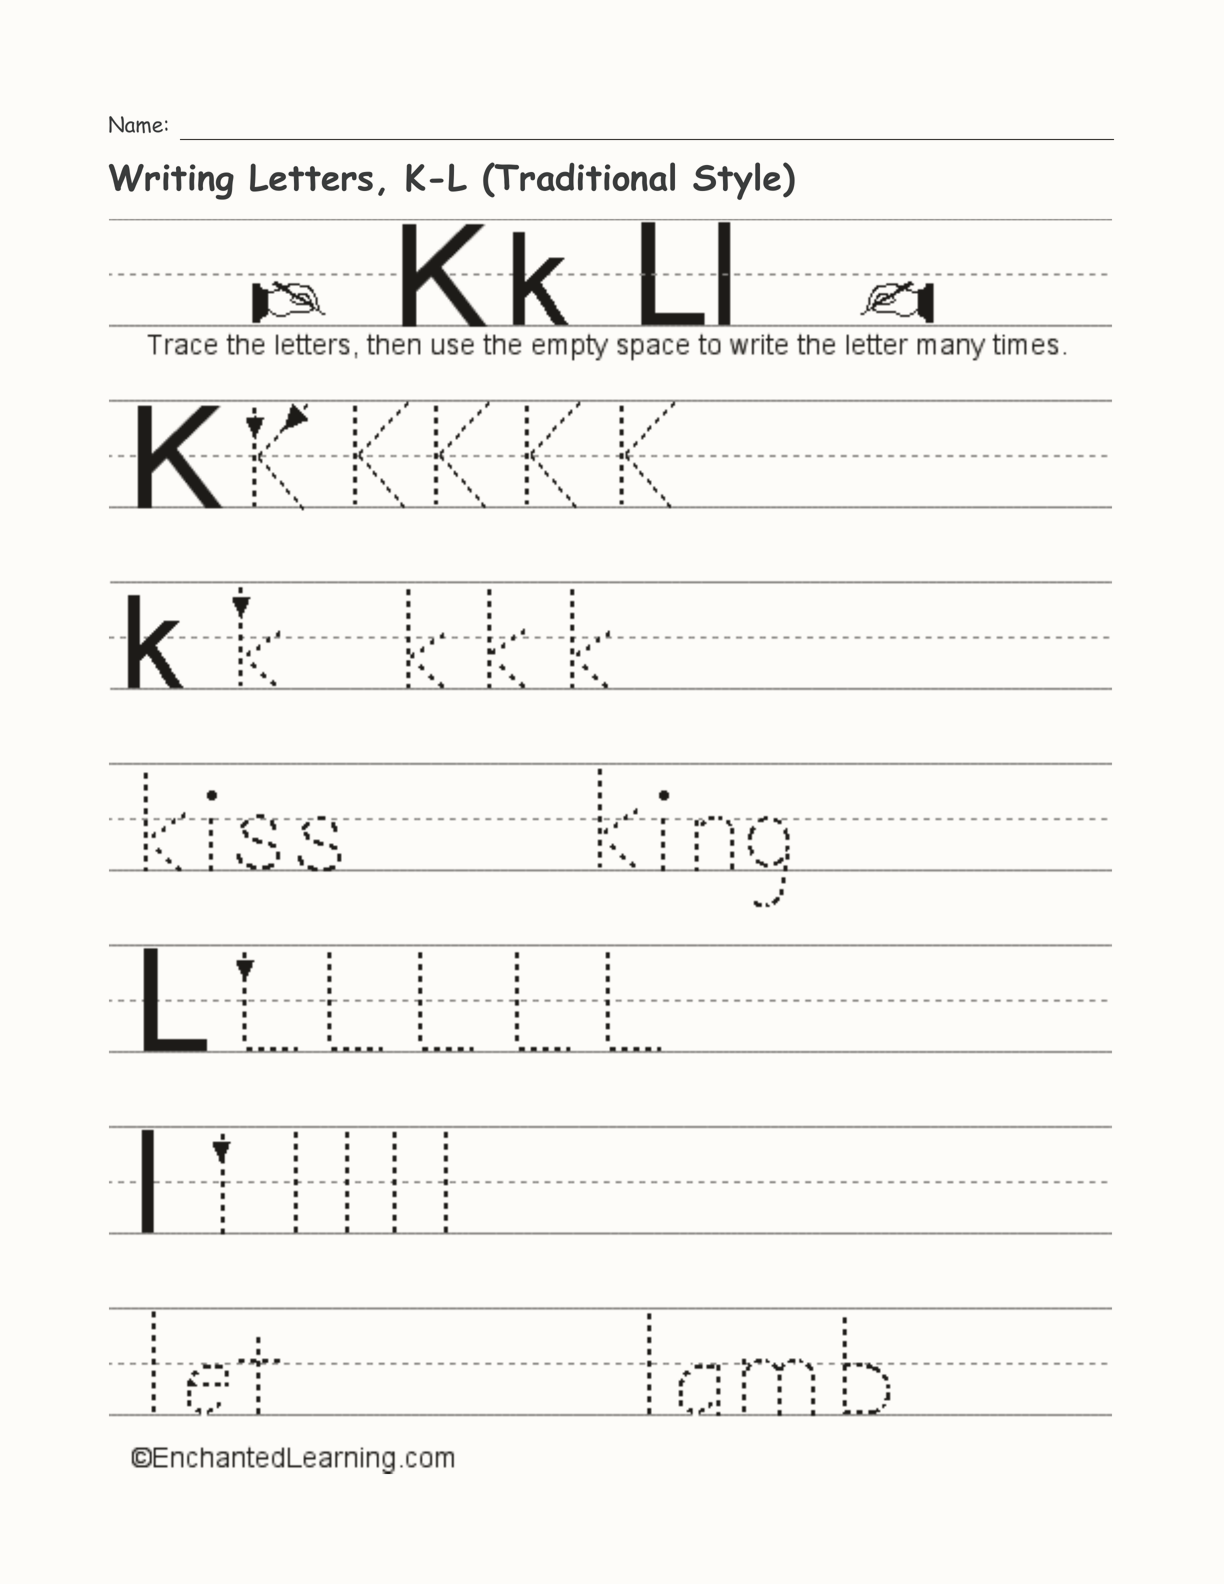 Writing Letters, K-L (Traditional Style) interactive worksheet page 1